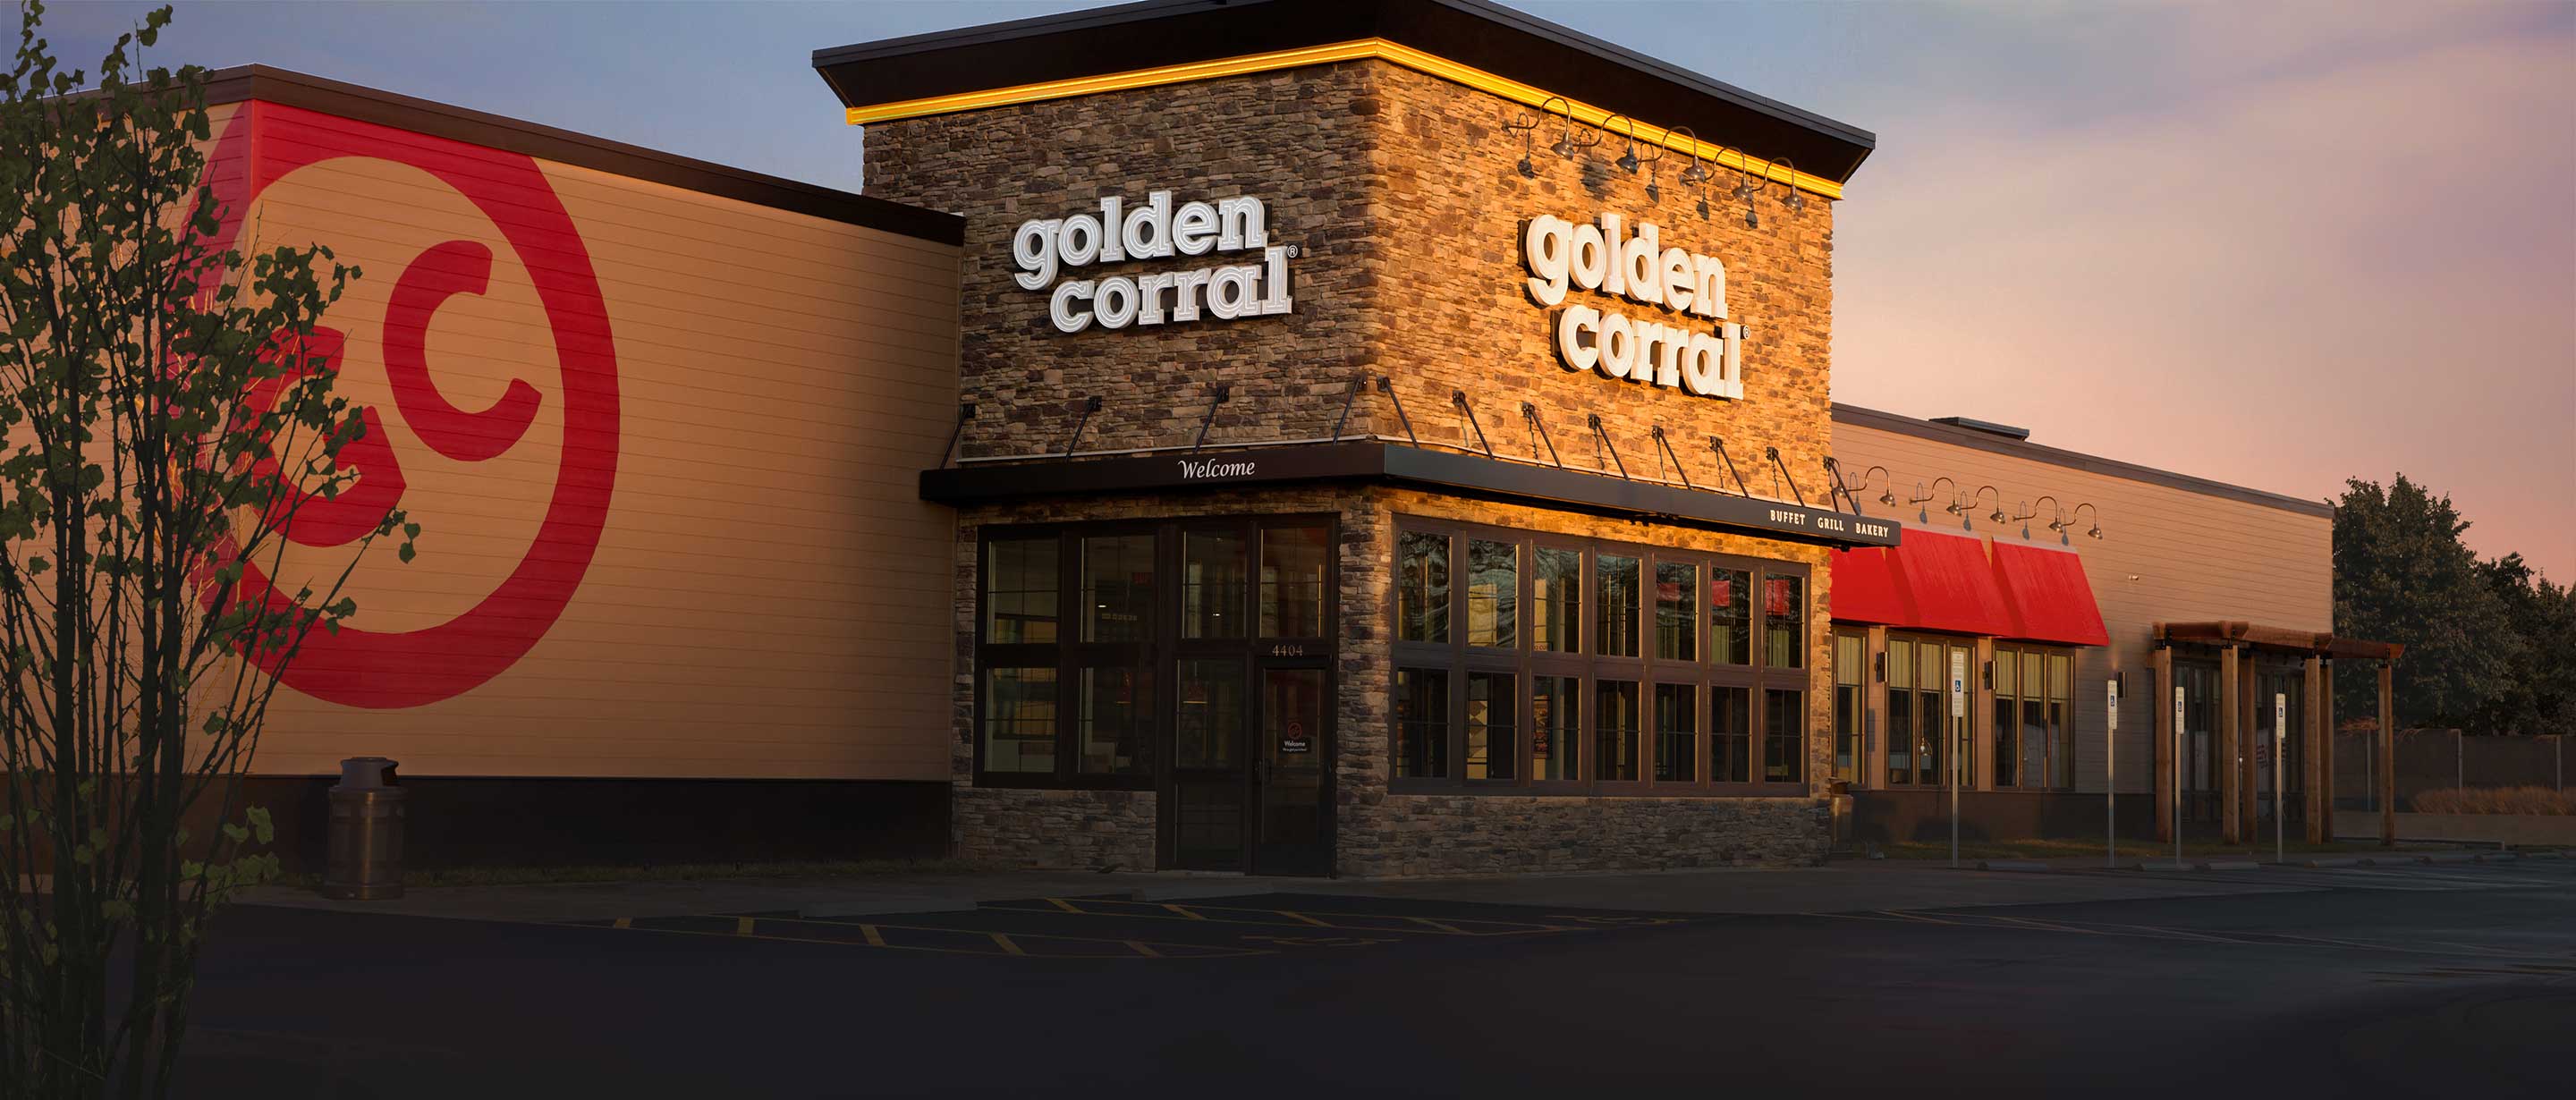 Frequently Asked Questions Golden Corral Buffet Restaurants